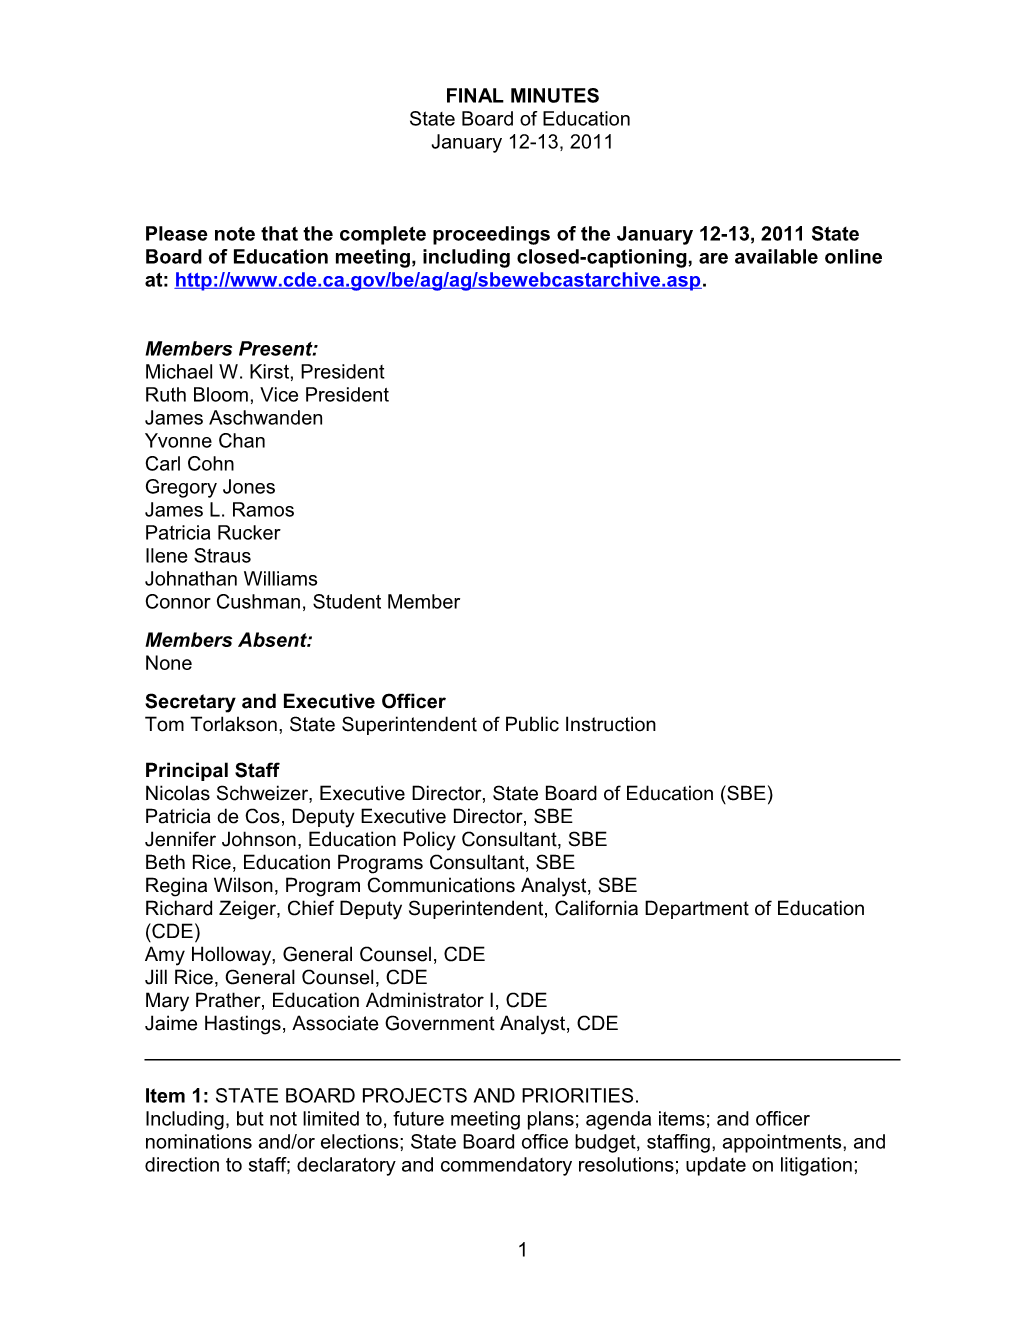 Final Minutes January 12-13, 2011 - SBE Minutes (CA State Board of Education)